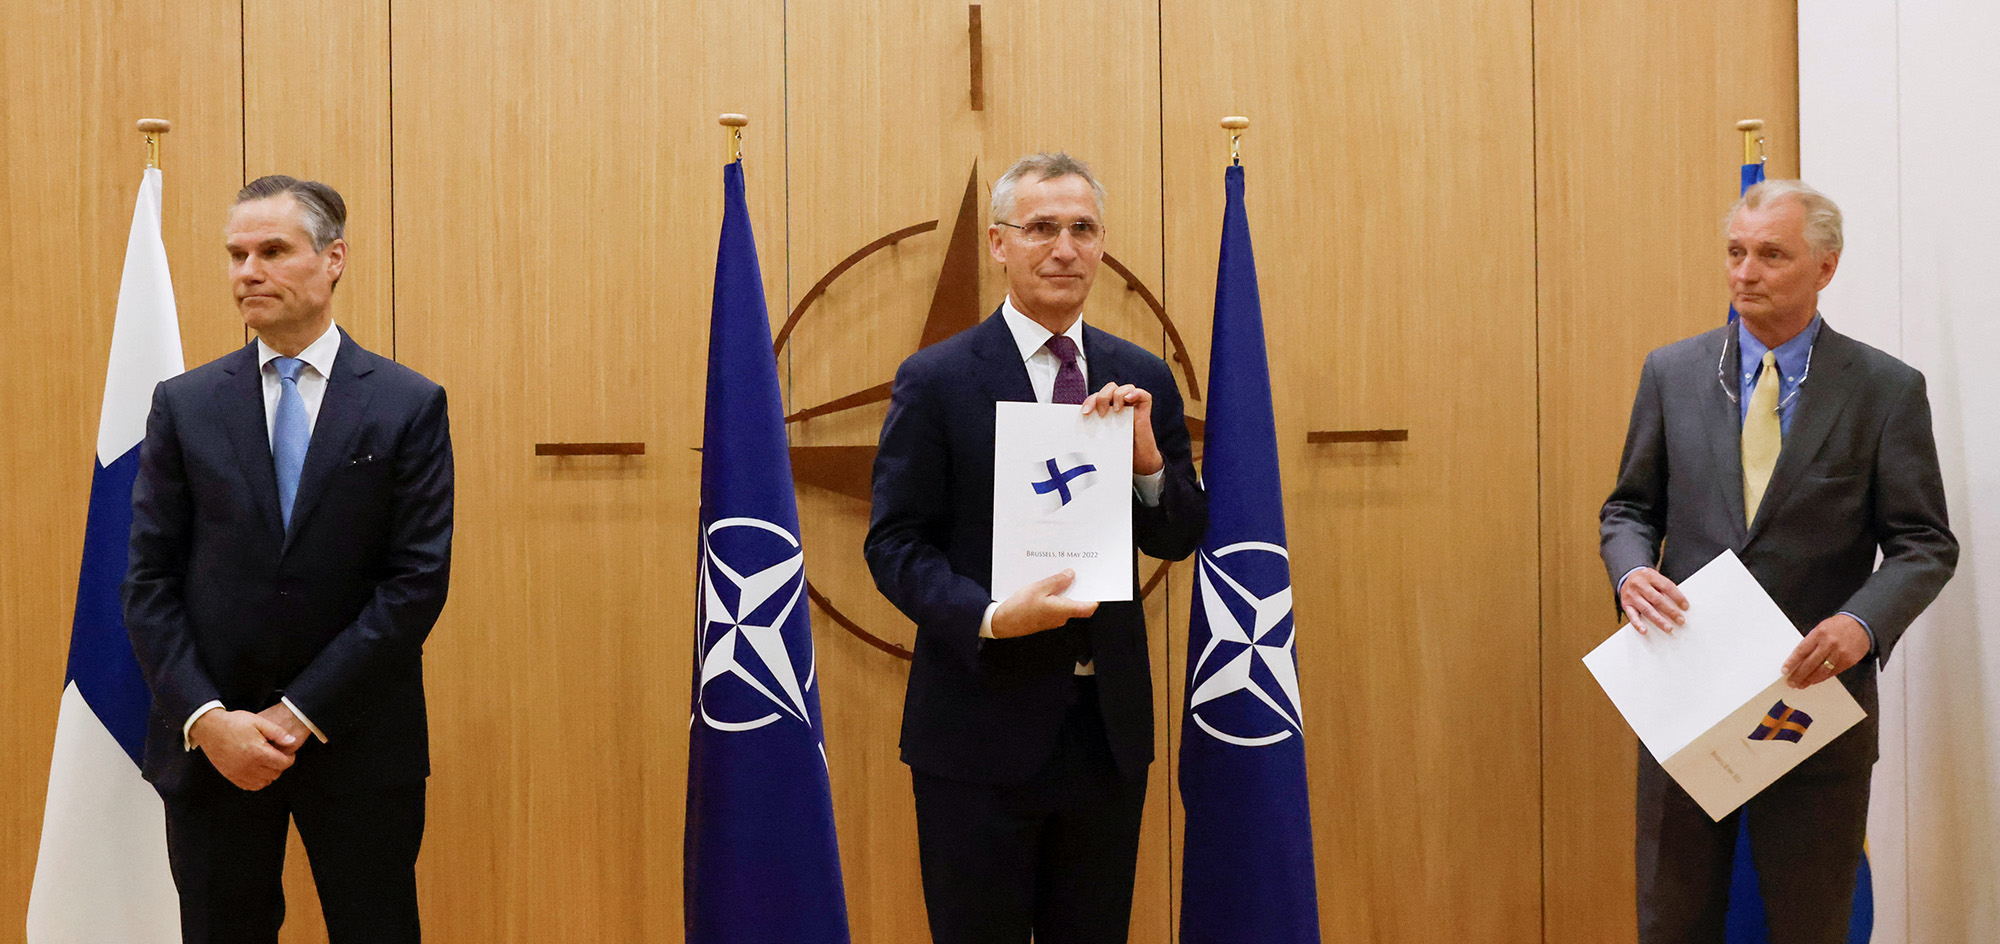 Finland's Ambassador to NATO Klaus Korhonen, left, NATO Secretary-General Jens Stoltenberg, center and Sweden's Ambassador to NATO Axel Wernhoff, right, attend a ceremony to mark Sweden's and Finland's application for NATO membership in Brussels, Belgium, on May 18.